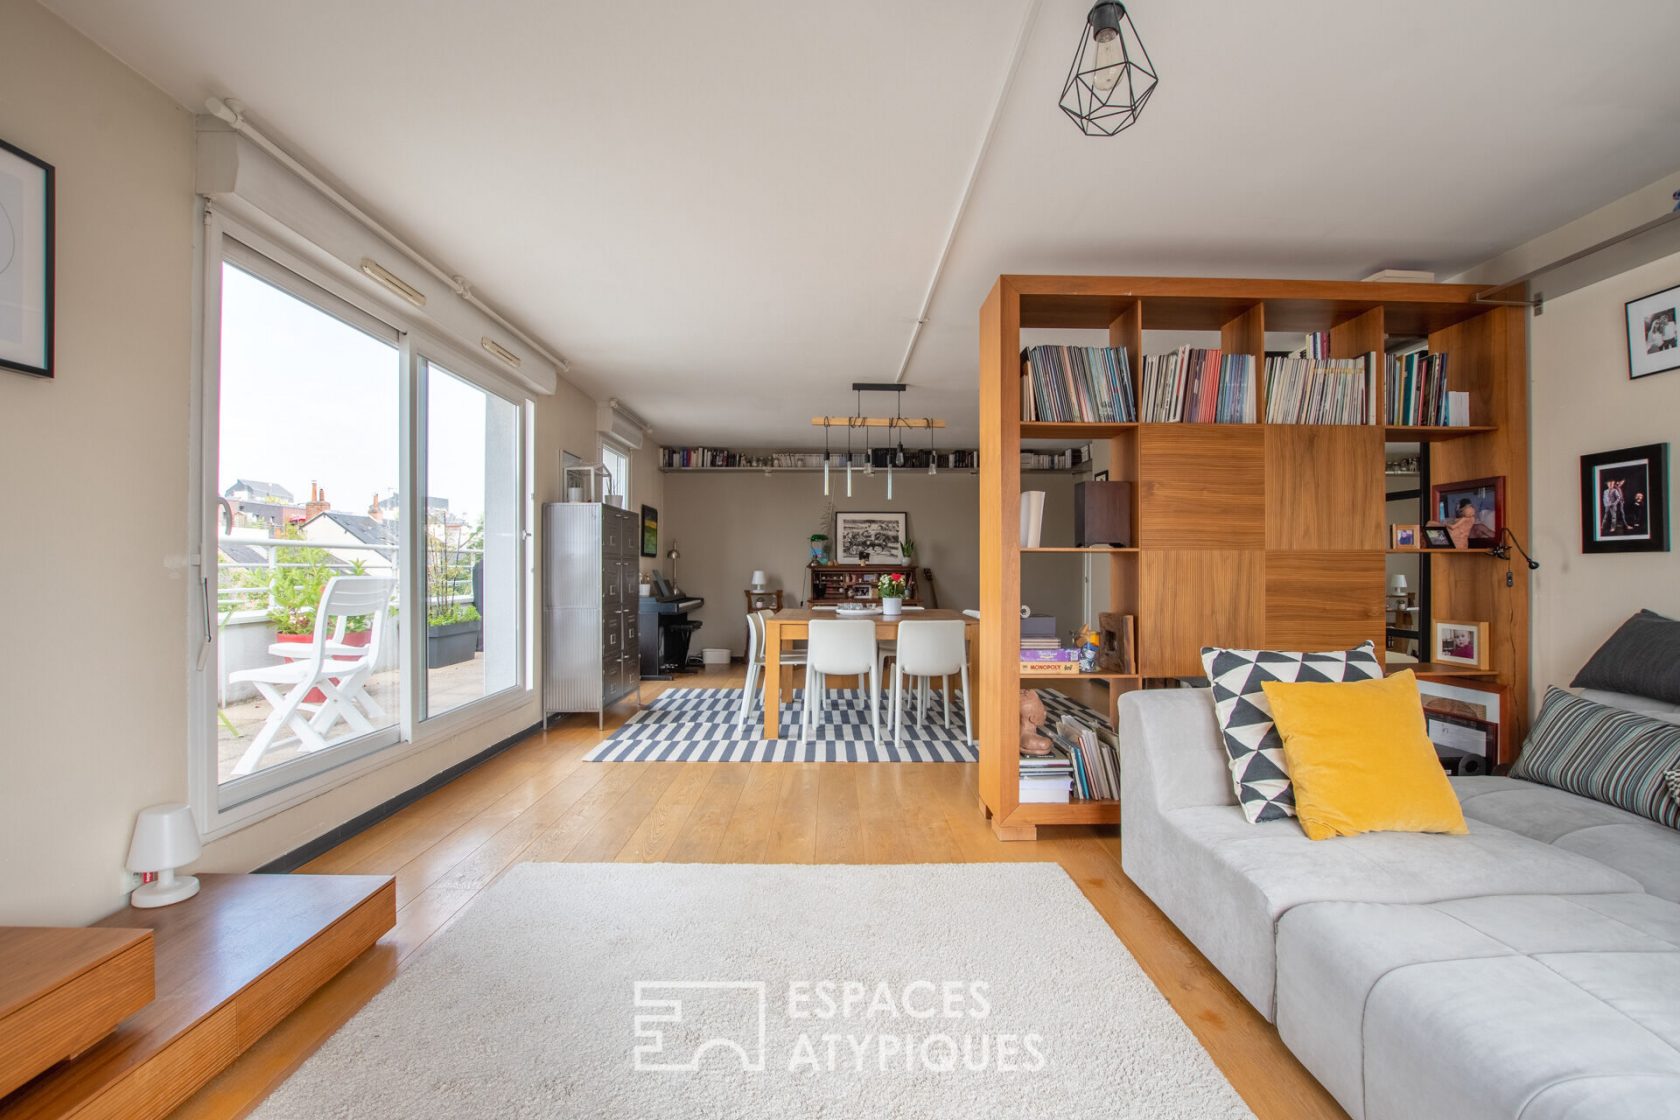 Le Lumineux – Top floor apartment with generous volumes